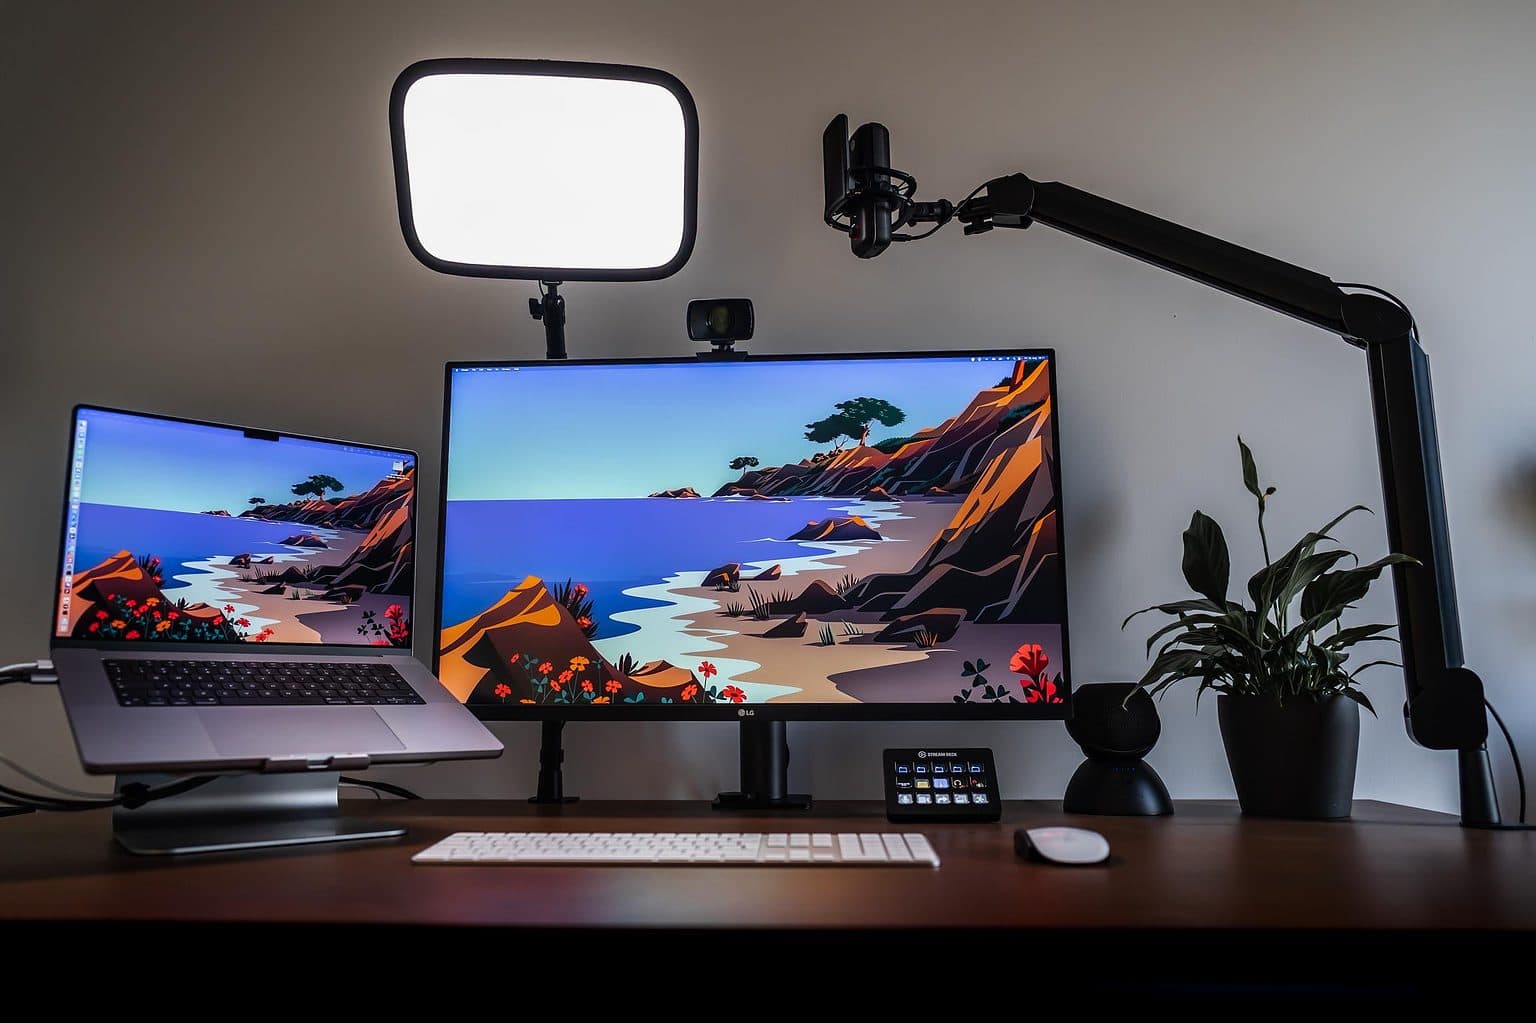 This is a well-lit setup for video calls.